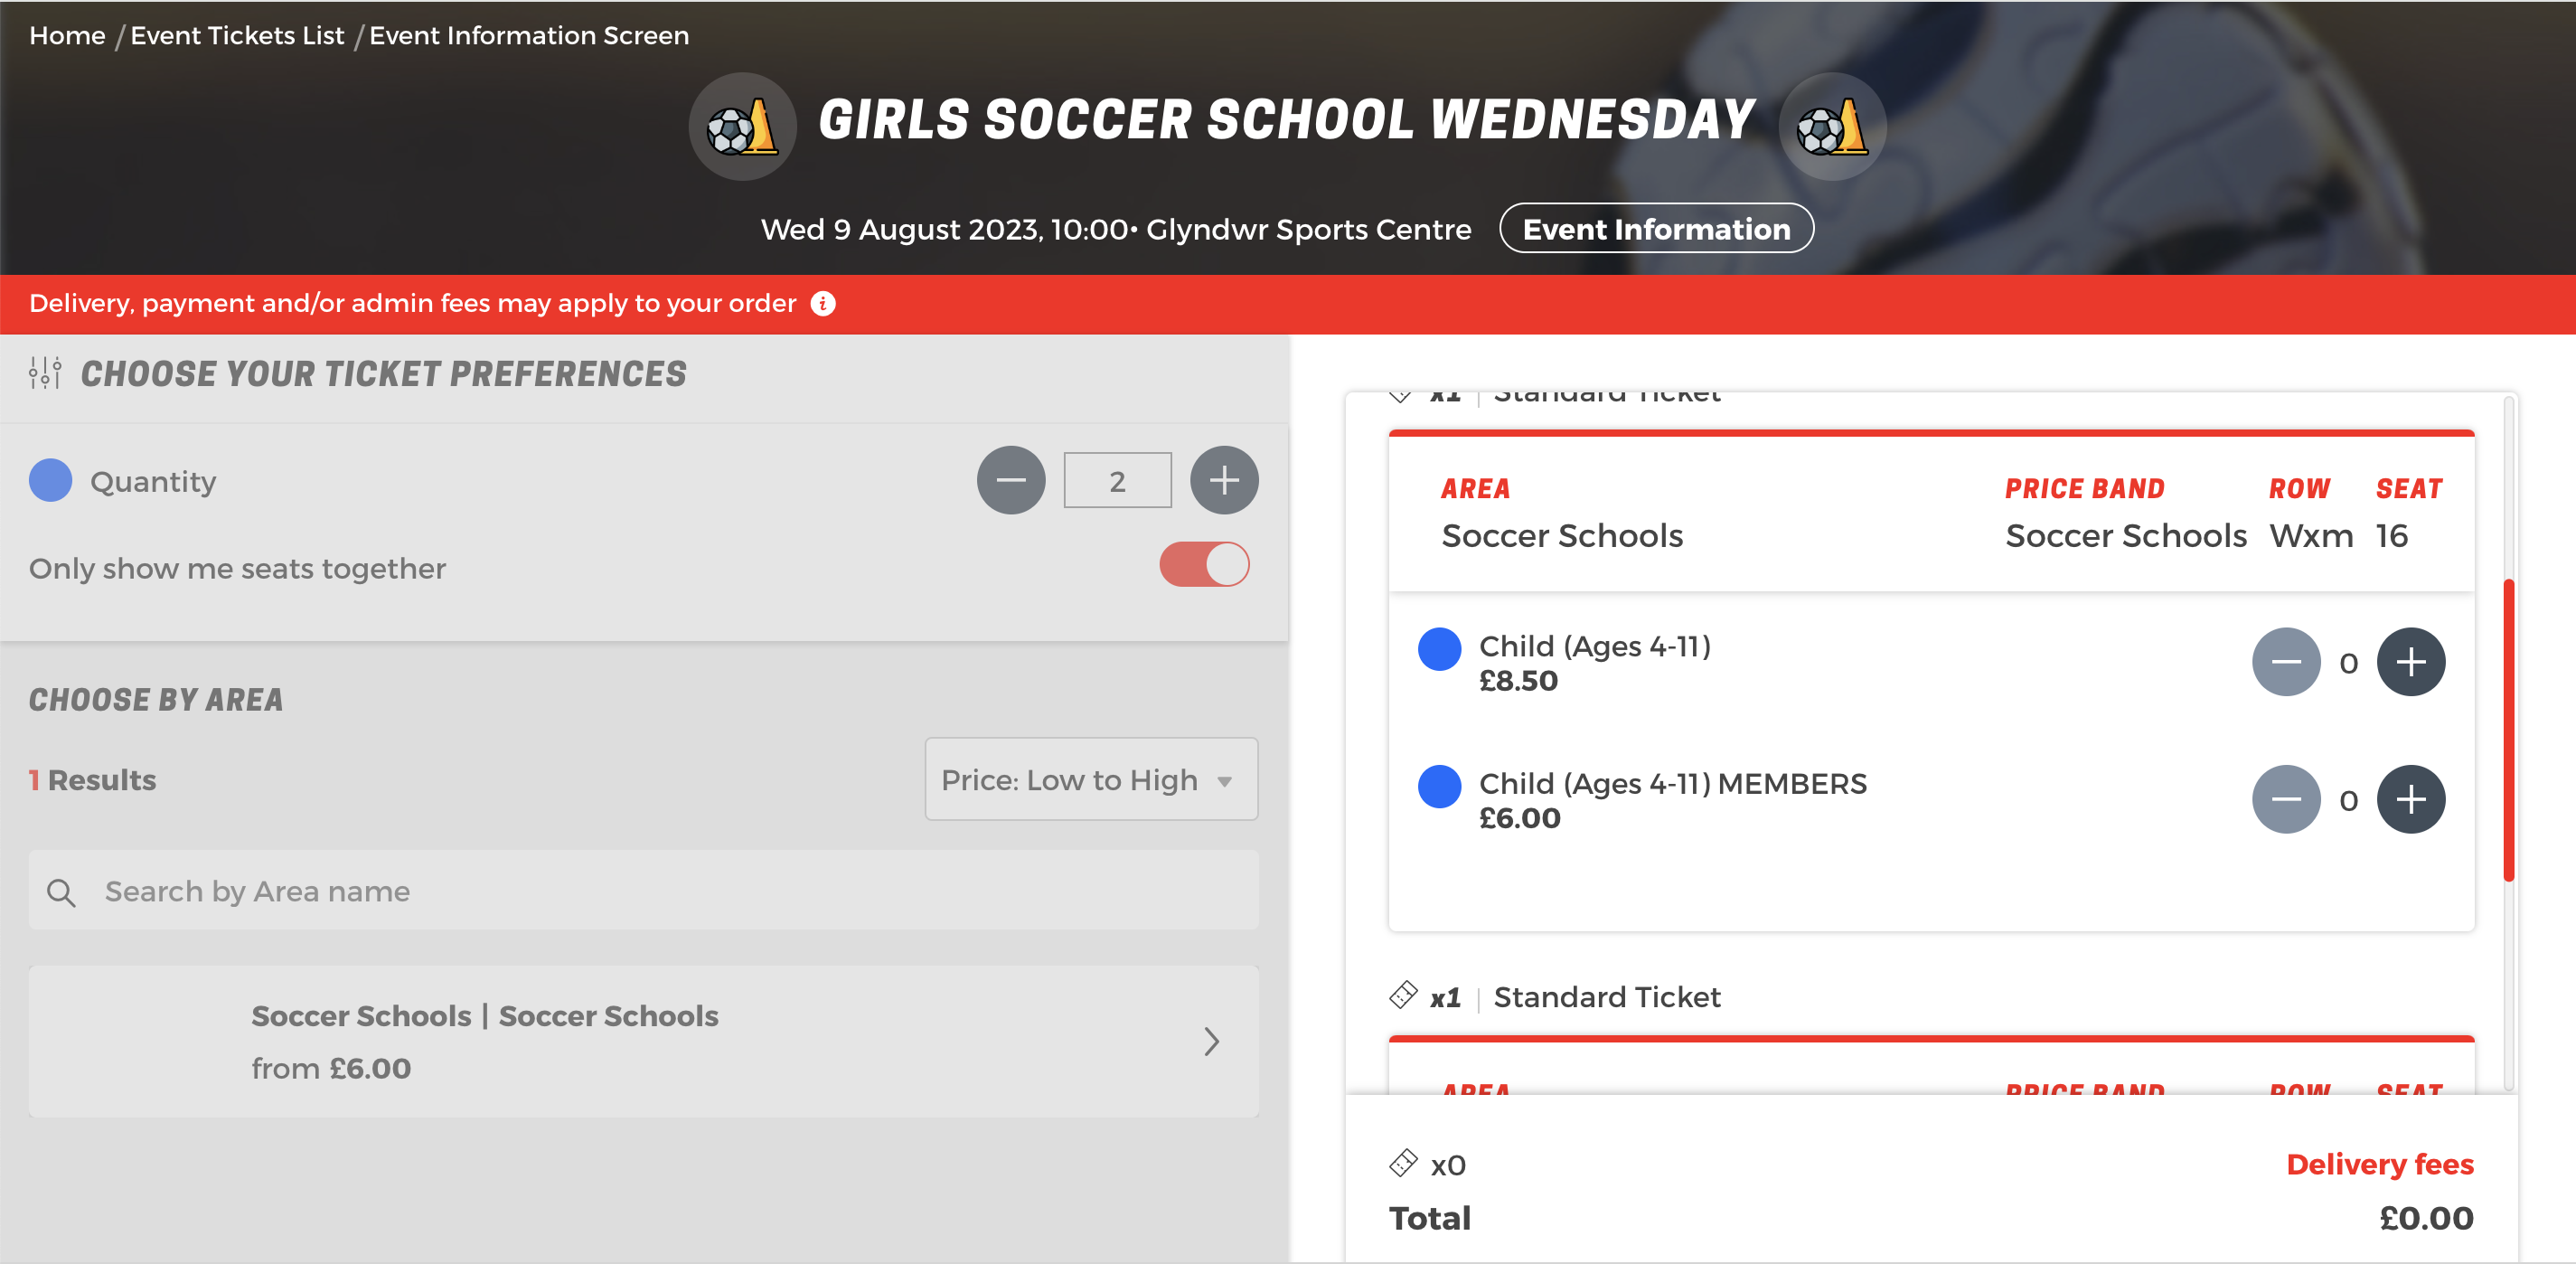 Screenshot of the Wrexham F.C. sport website, specifically online ticketing facility for the Girl's Soccer School event